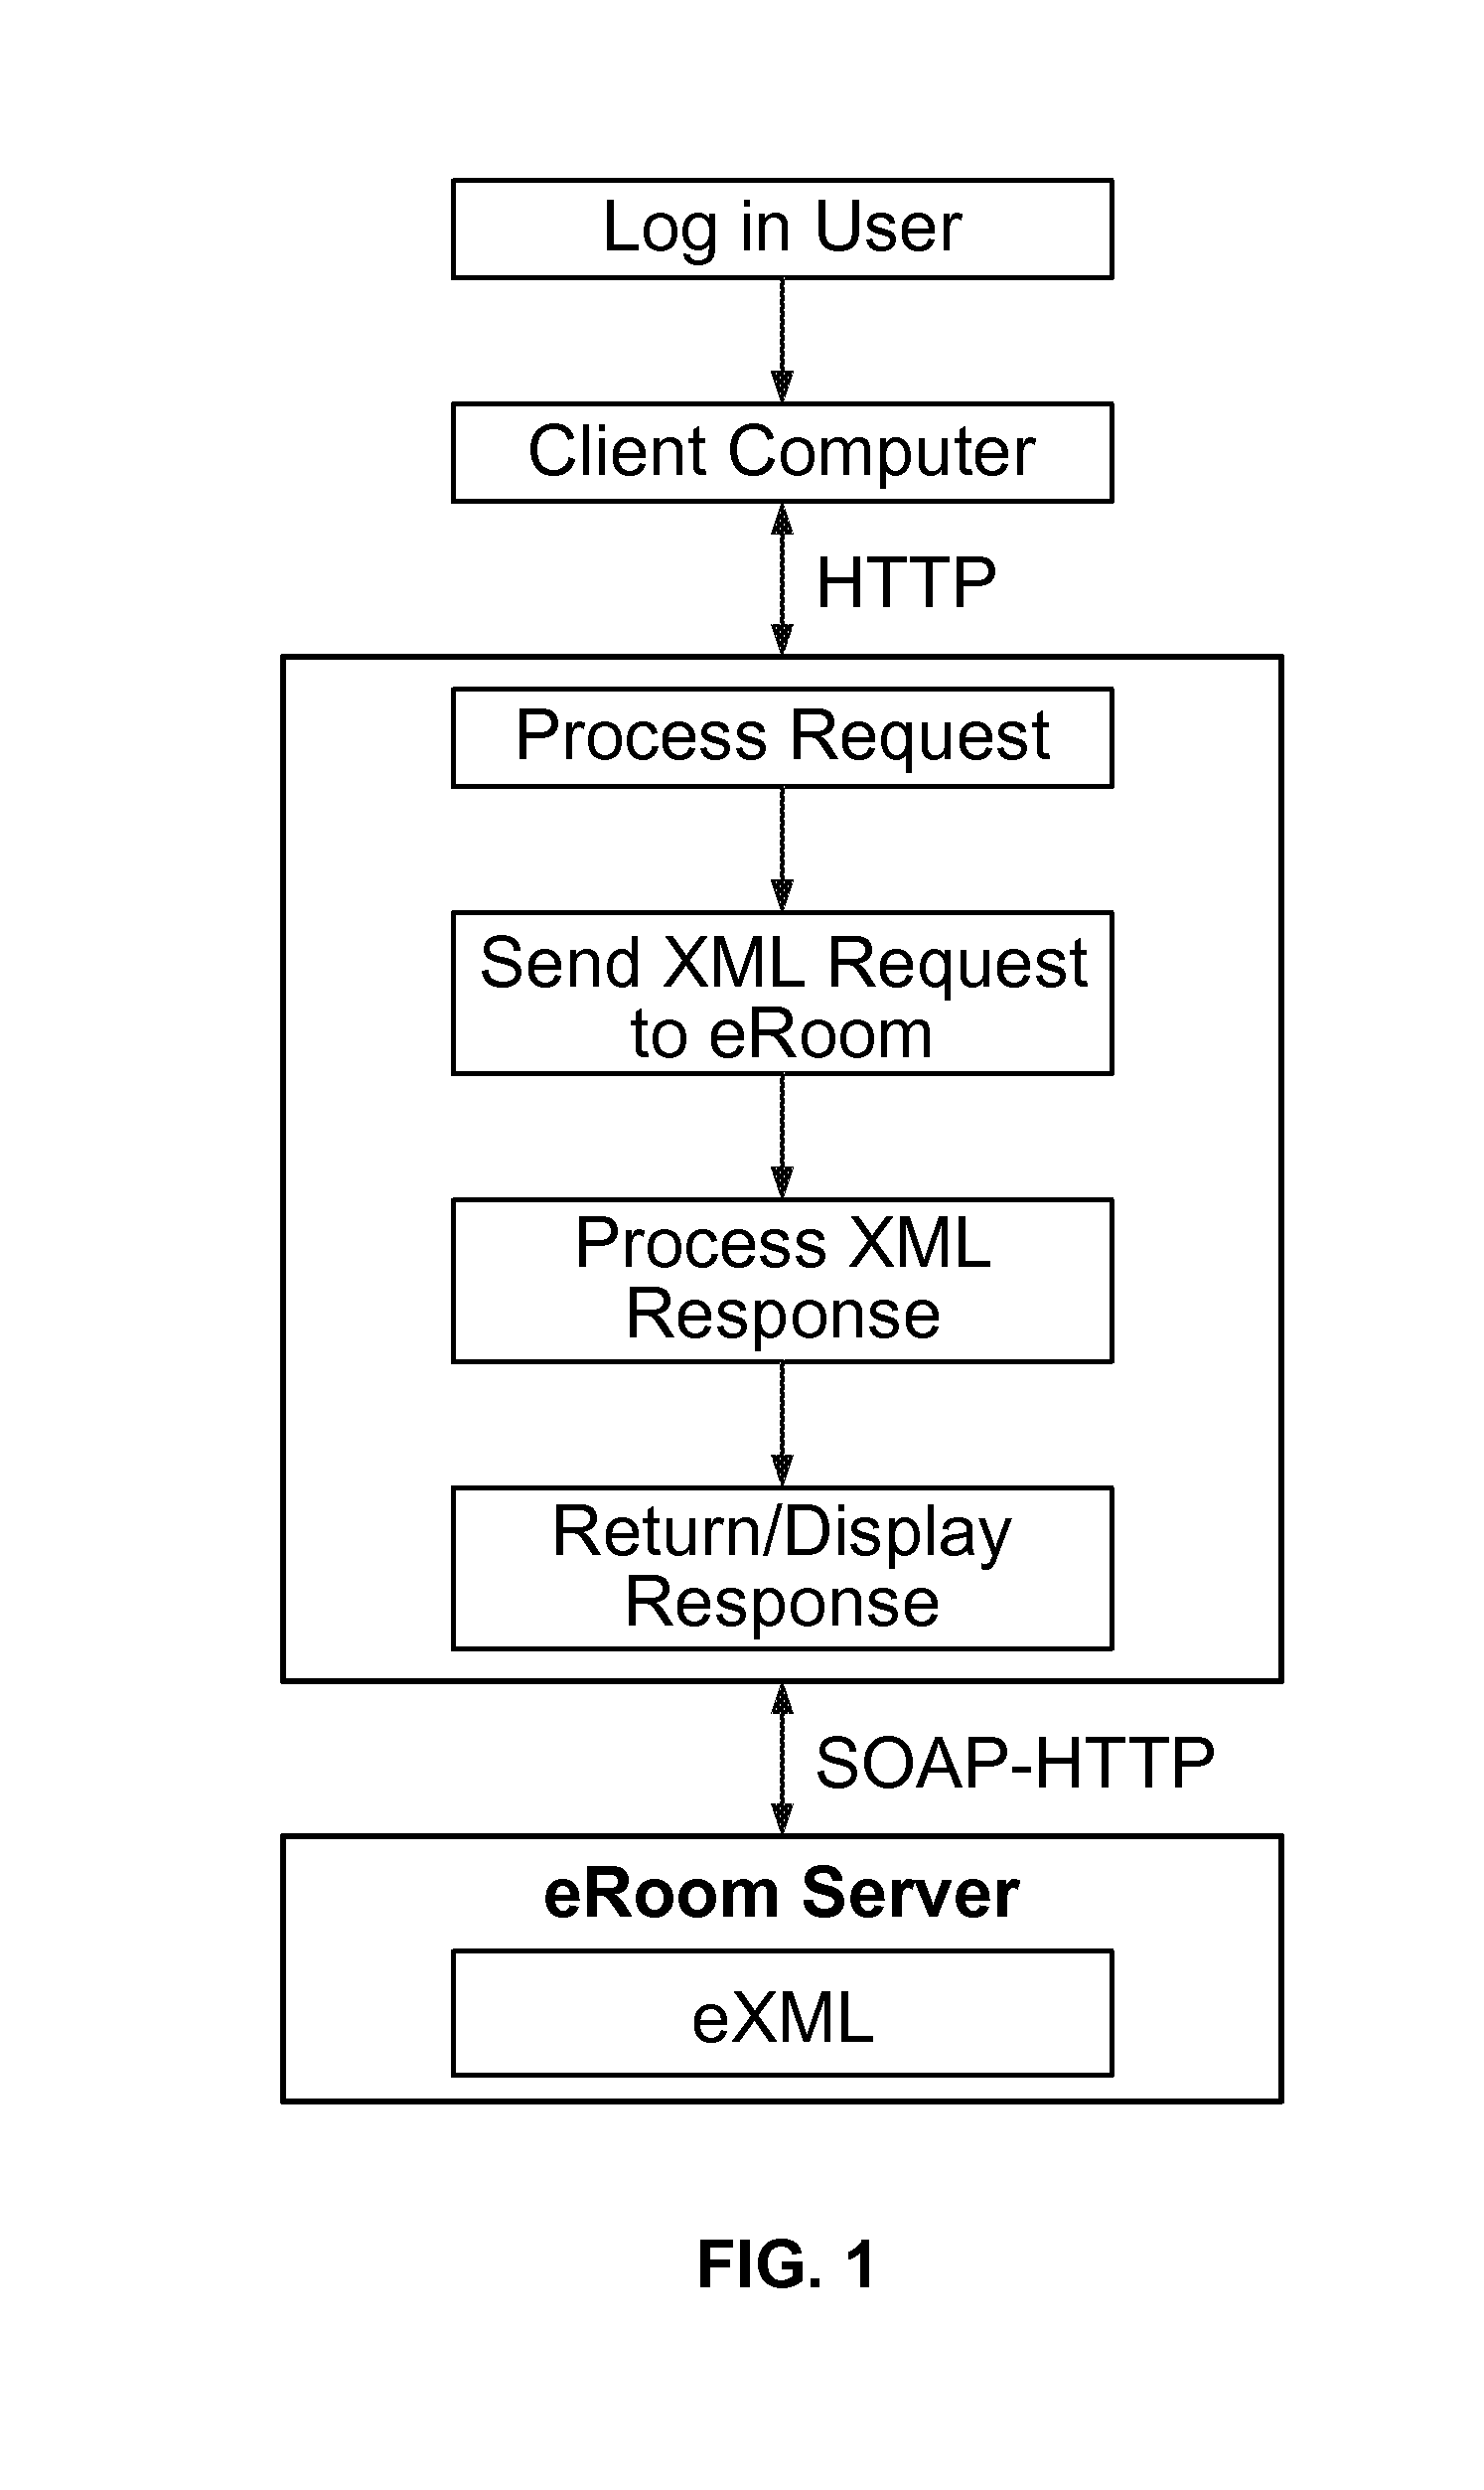 Hierarchical display of project information in a collaboration environment